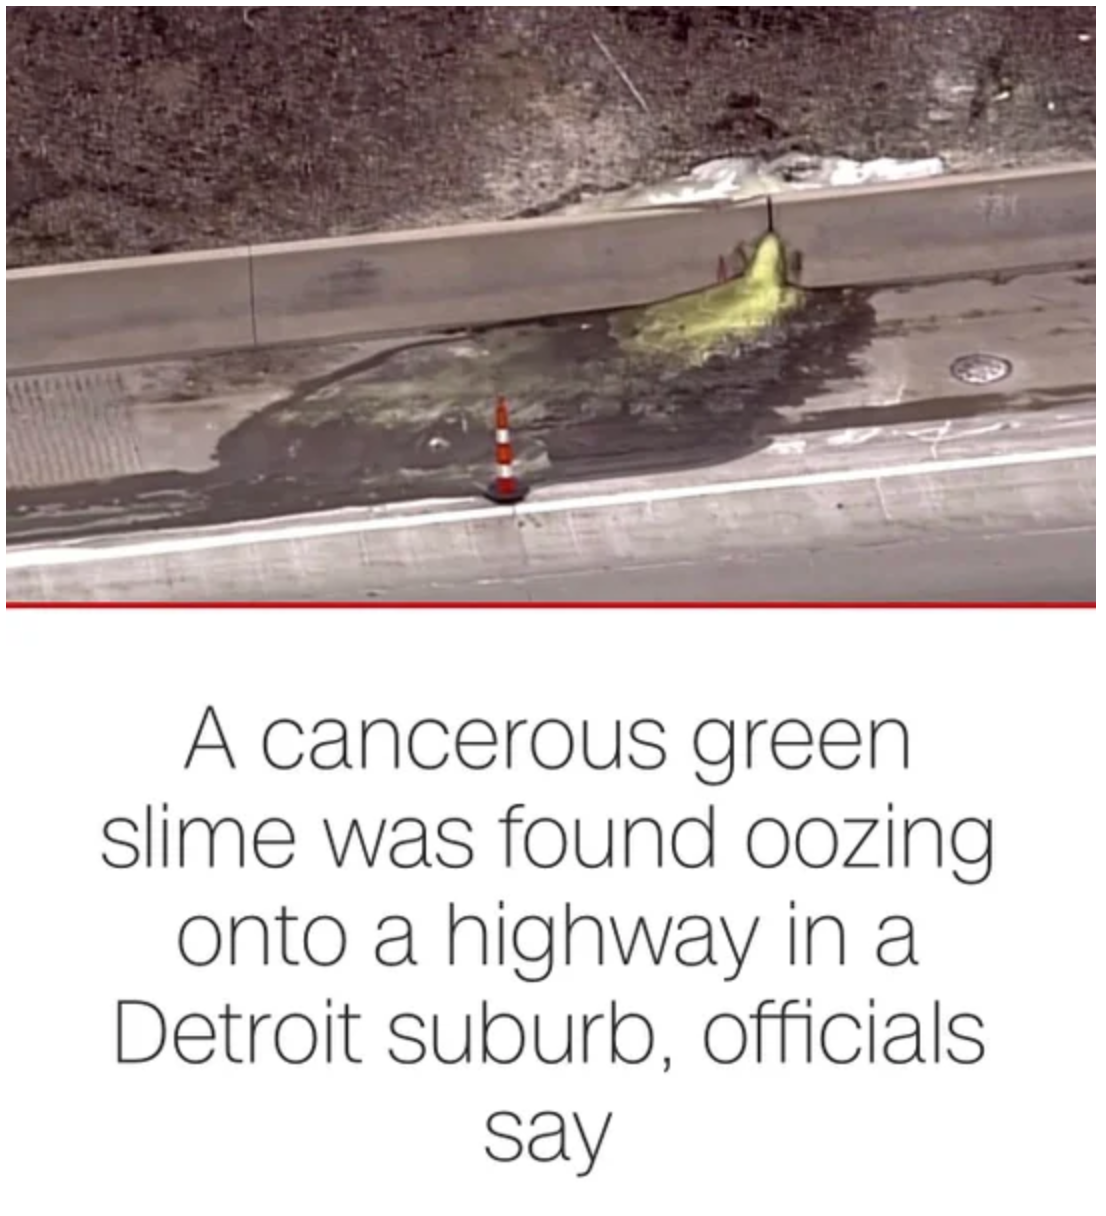 water - A cancerous green slime was found oozing onto a highway in a Detroit suburb, officials say